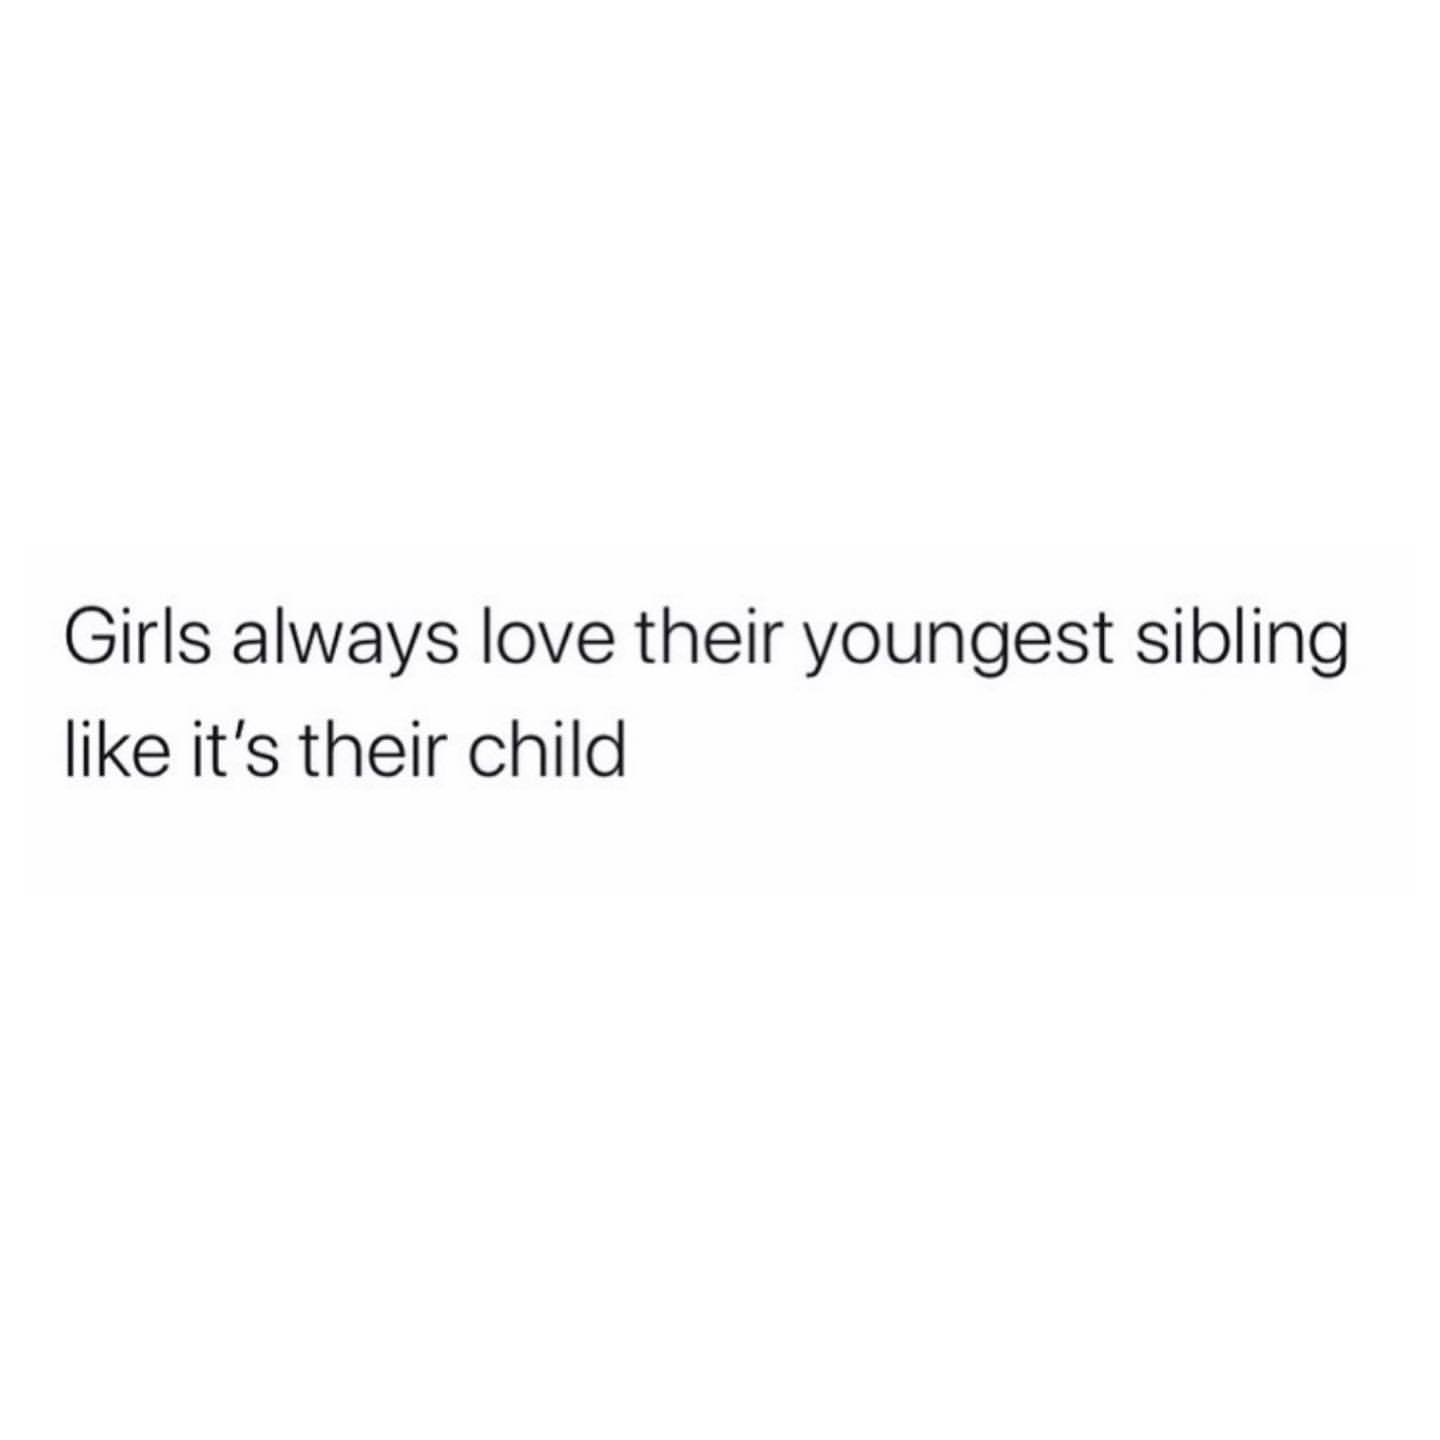 Girls always love their youngest sibling like it's their child.